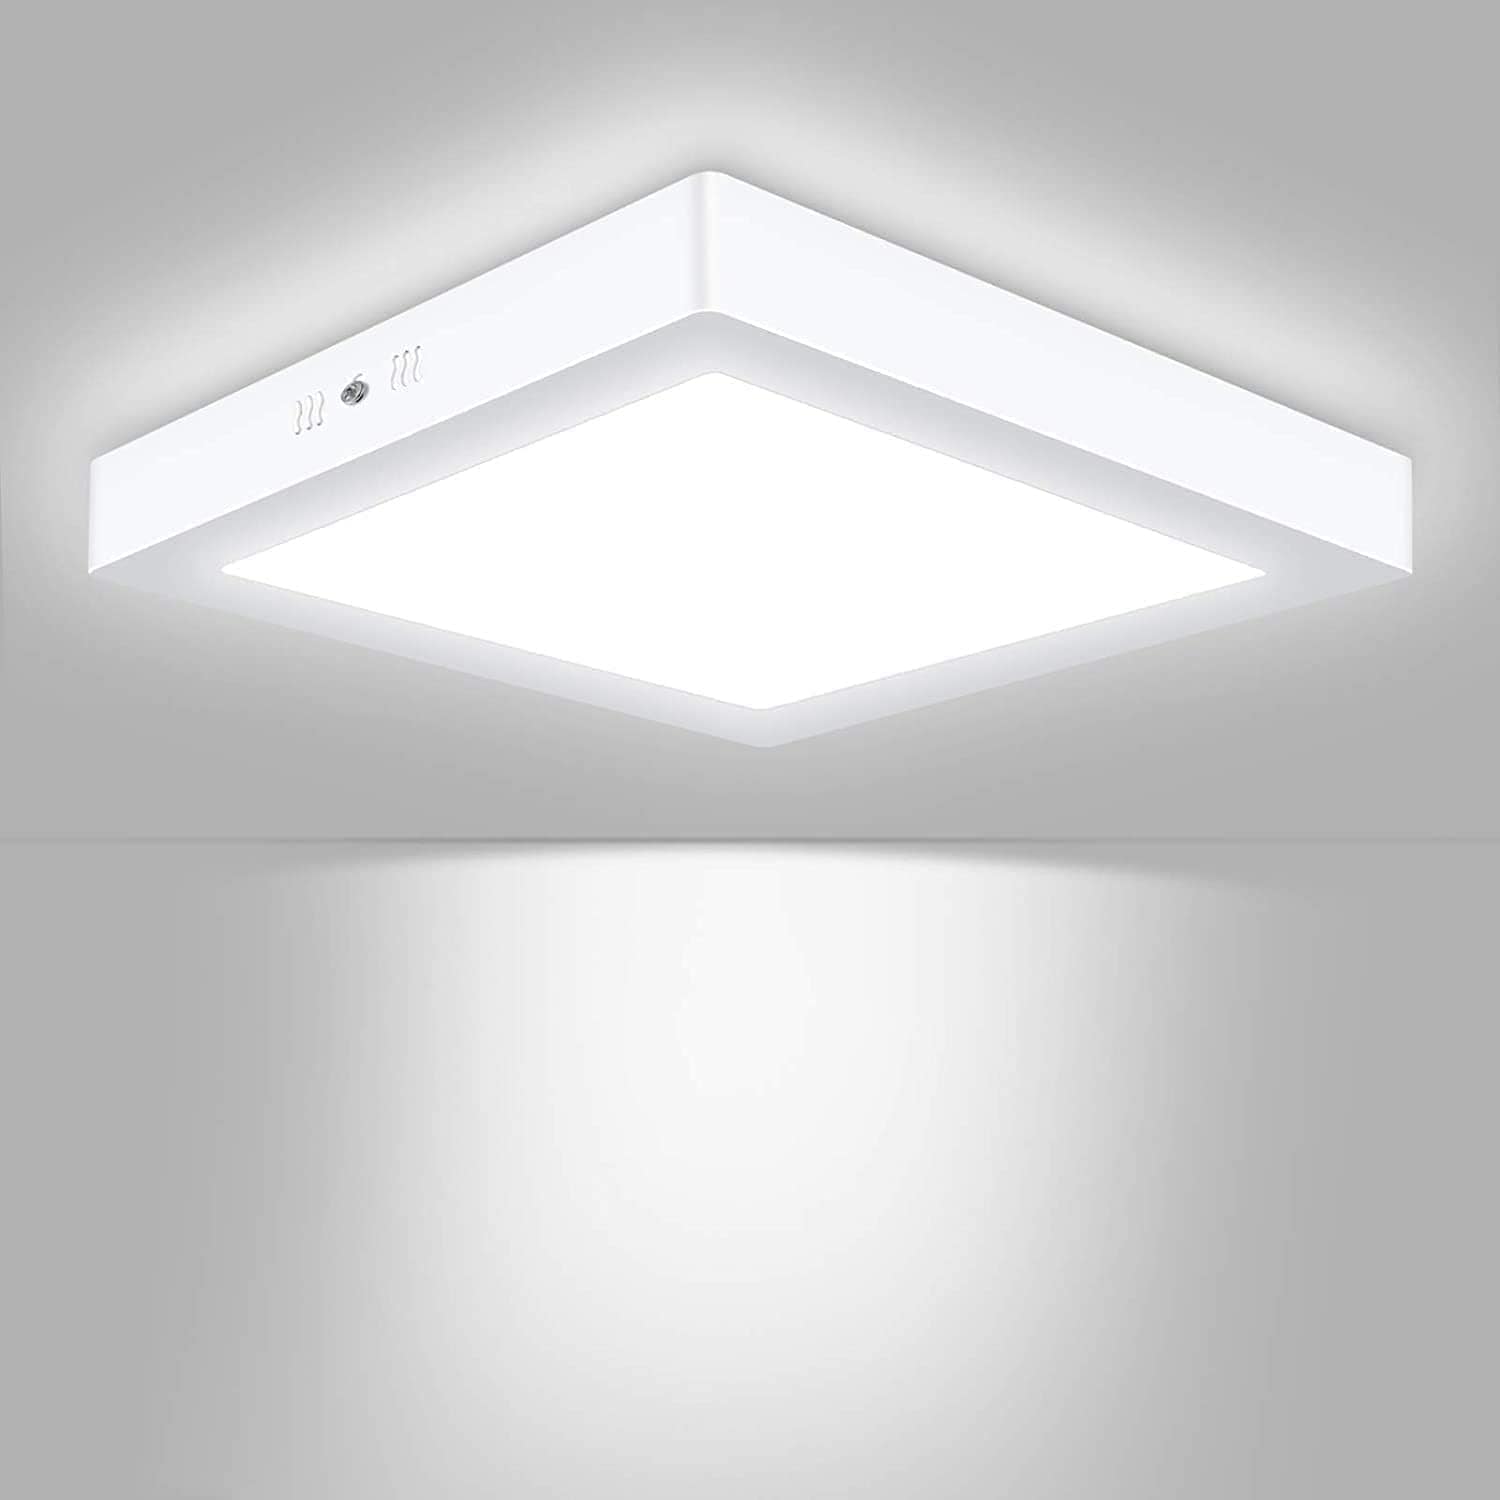 Buy LED Square Surface Mounted Panel Light 6000K Cool White (18W & 24W) - 2504-Series | Shop at Supply Master Accra, Ghana Lamps & Lightings Buy Tools hardware Building materials